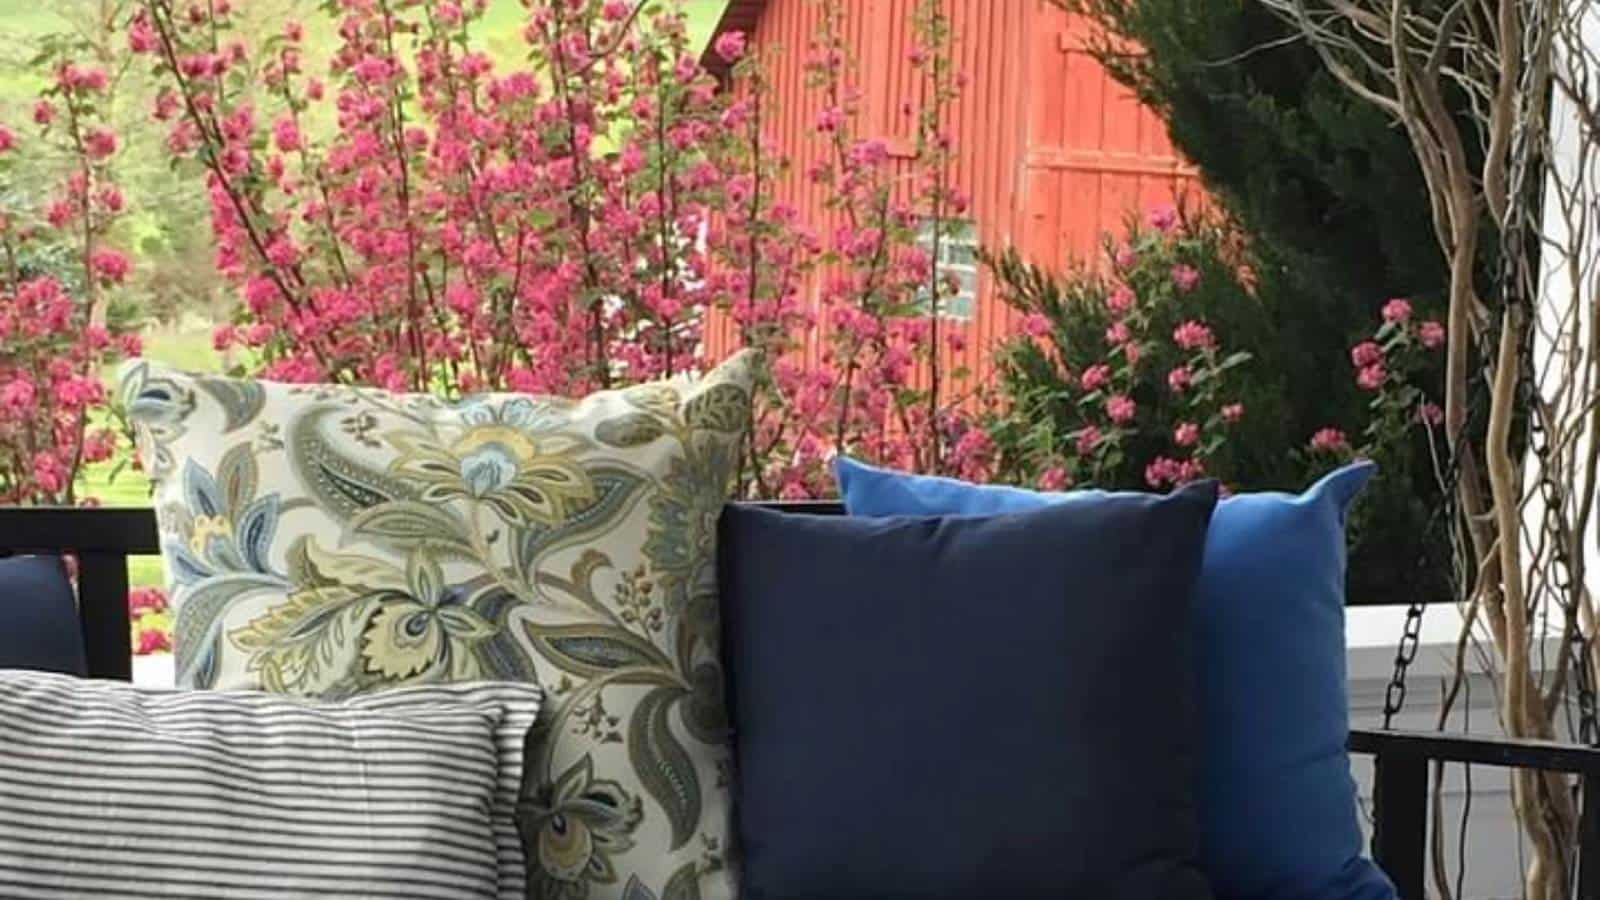 Close up view of porch swing with multicolored pillows surrounded by pink-flowered bushes and red barn in the background